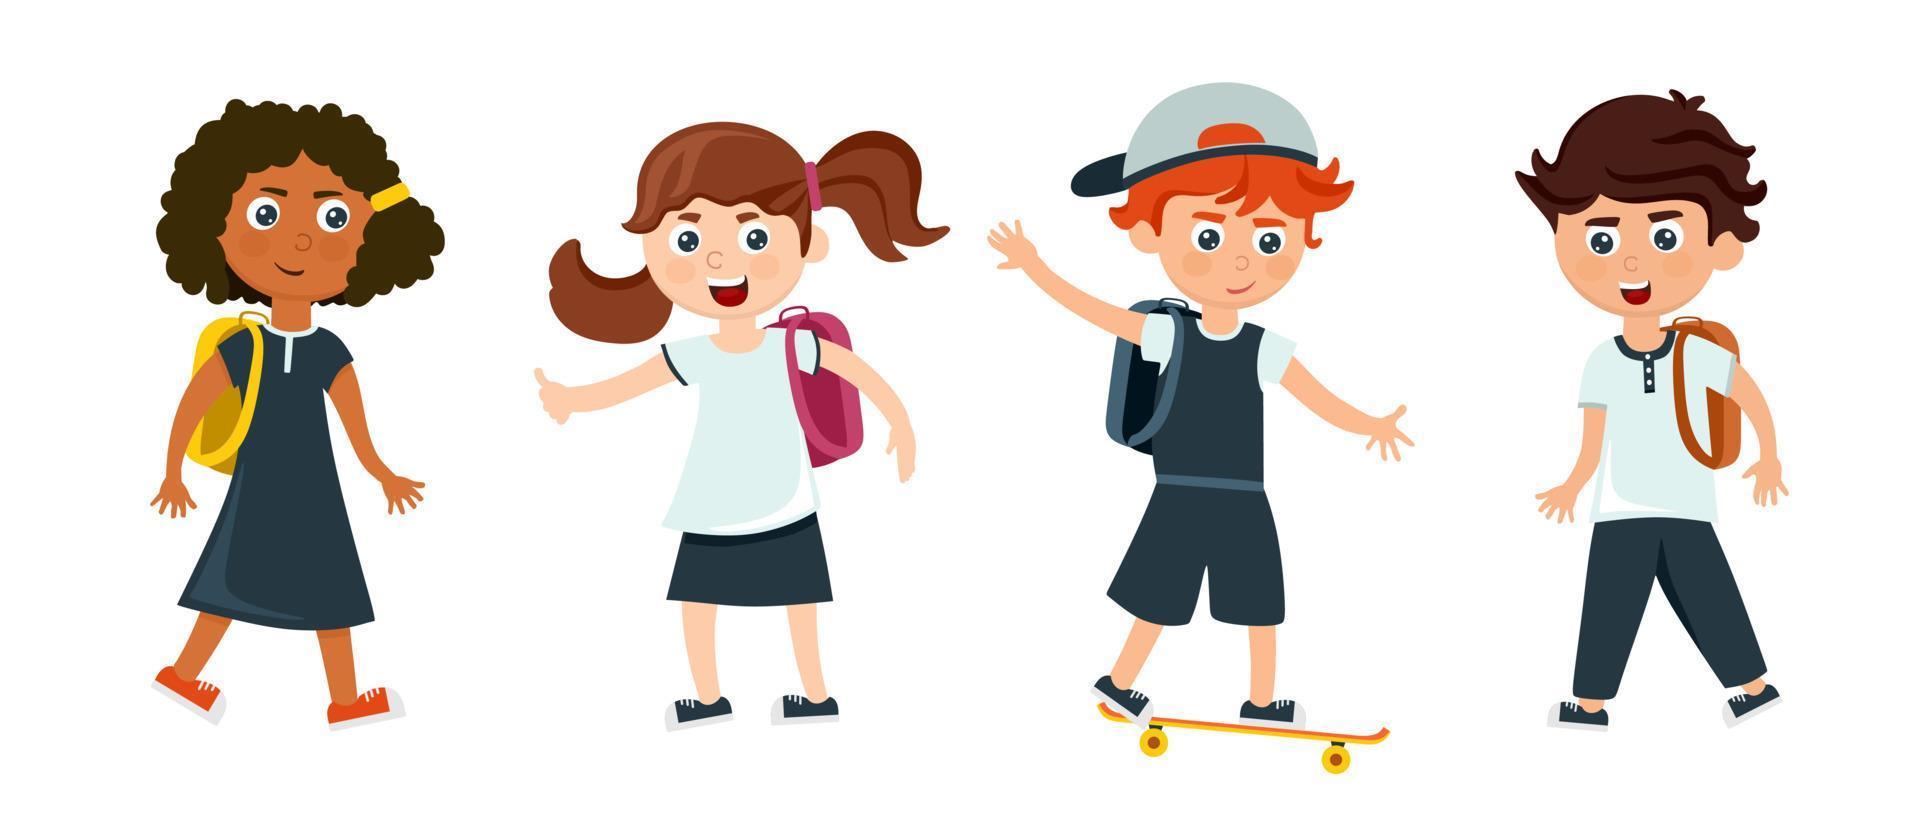 A group of schoolchildren and schoolgirls with backpacks going to school in a cartoon style. vector